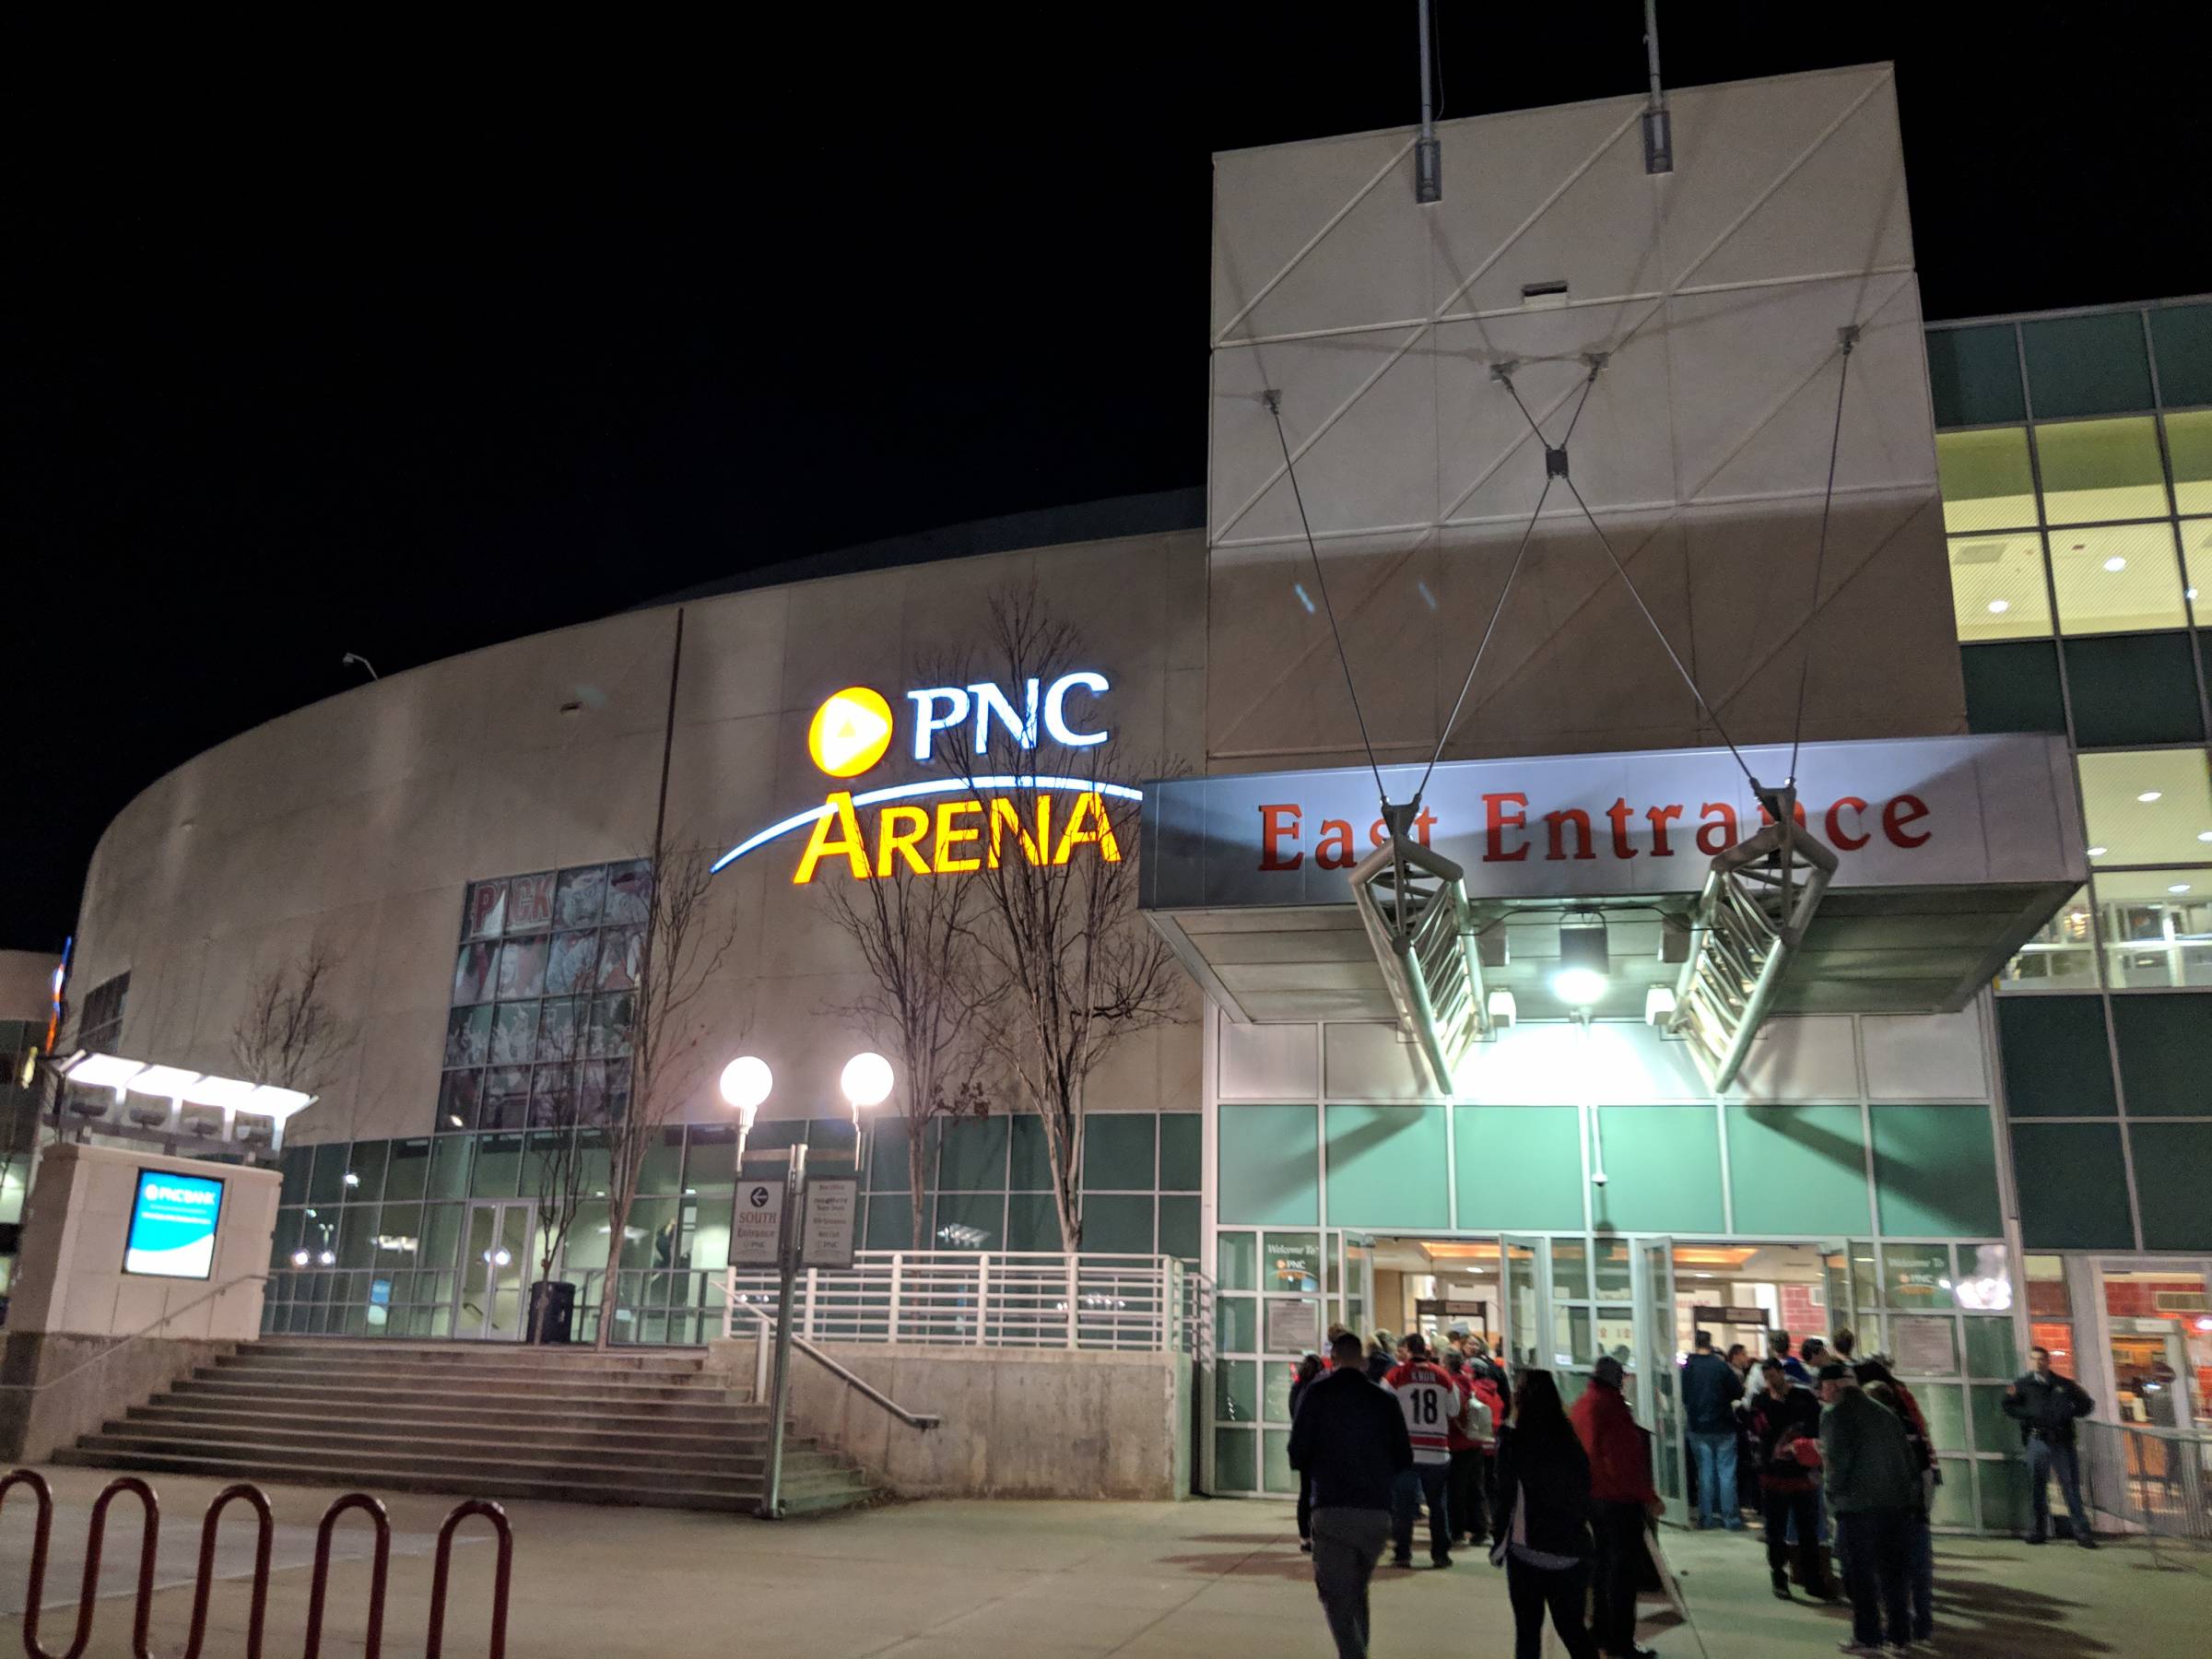 outside of PNC Arena in Raleigh